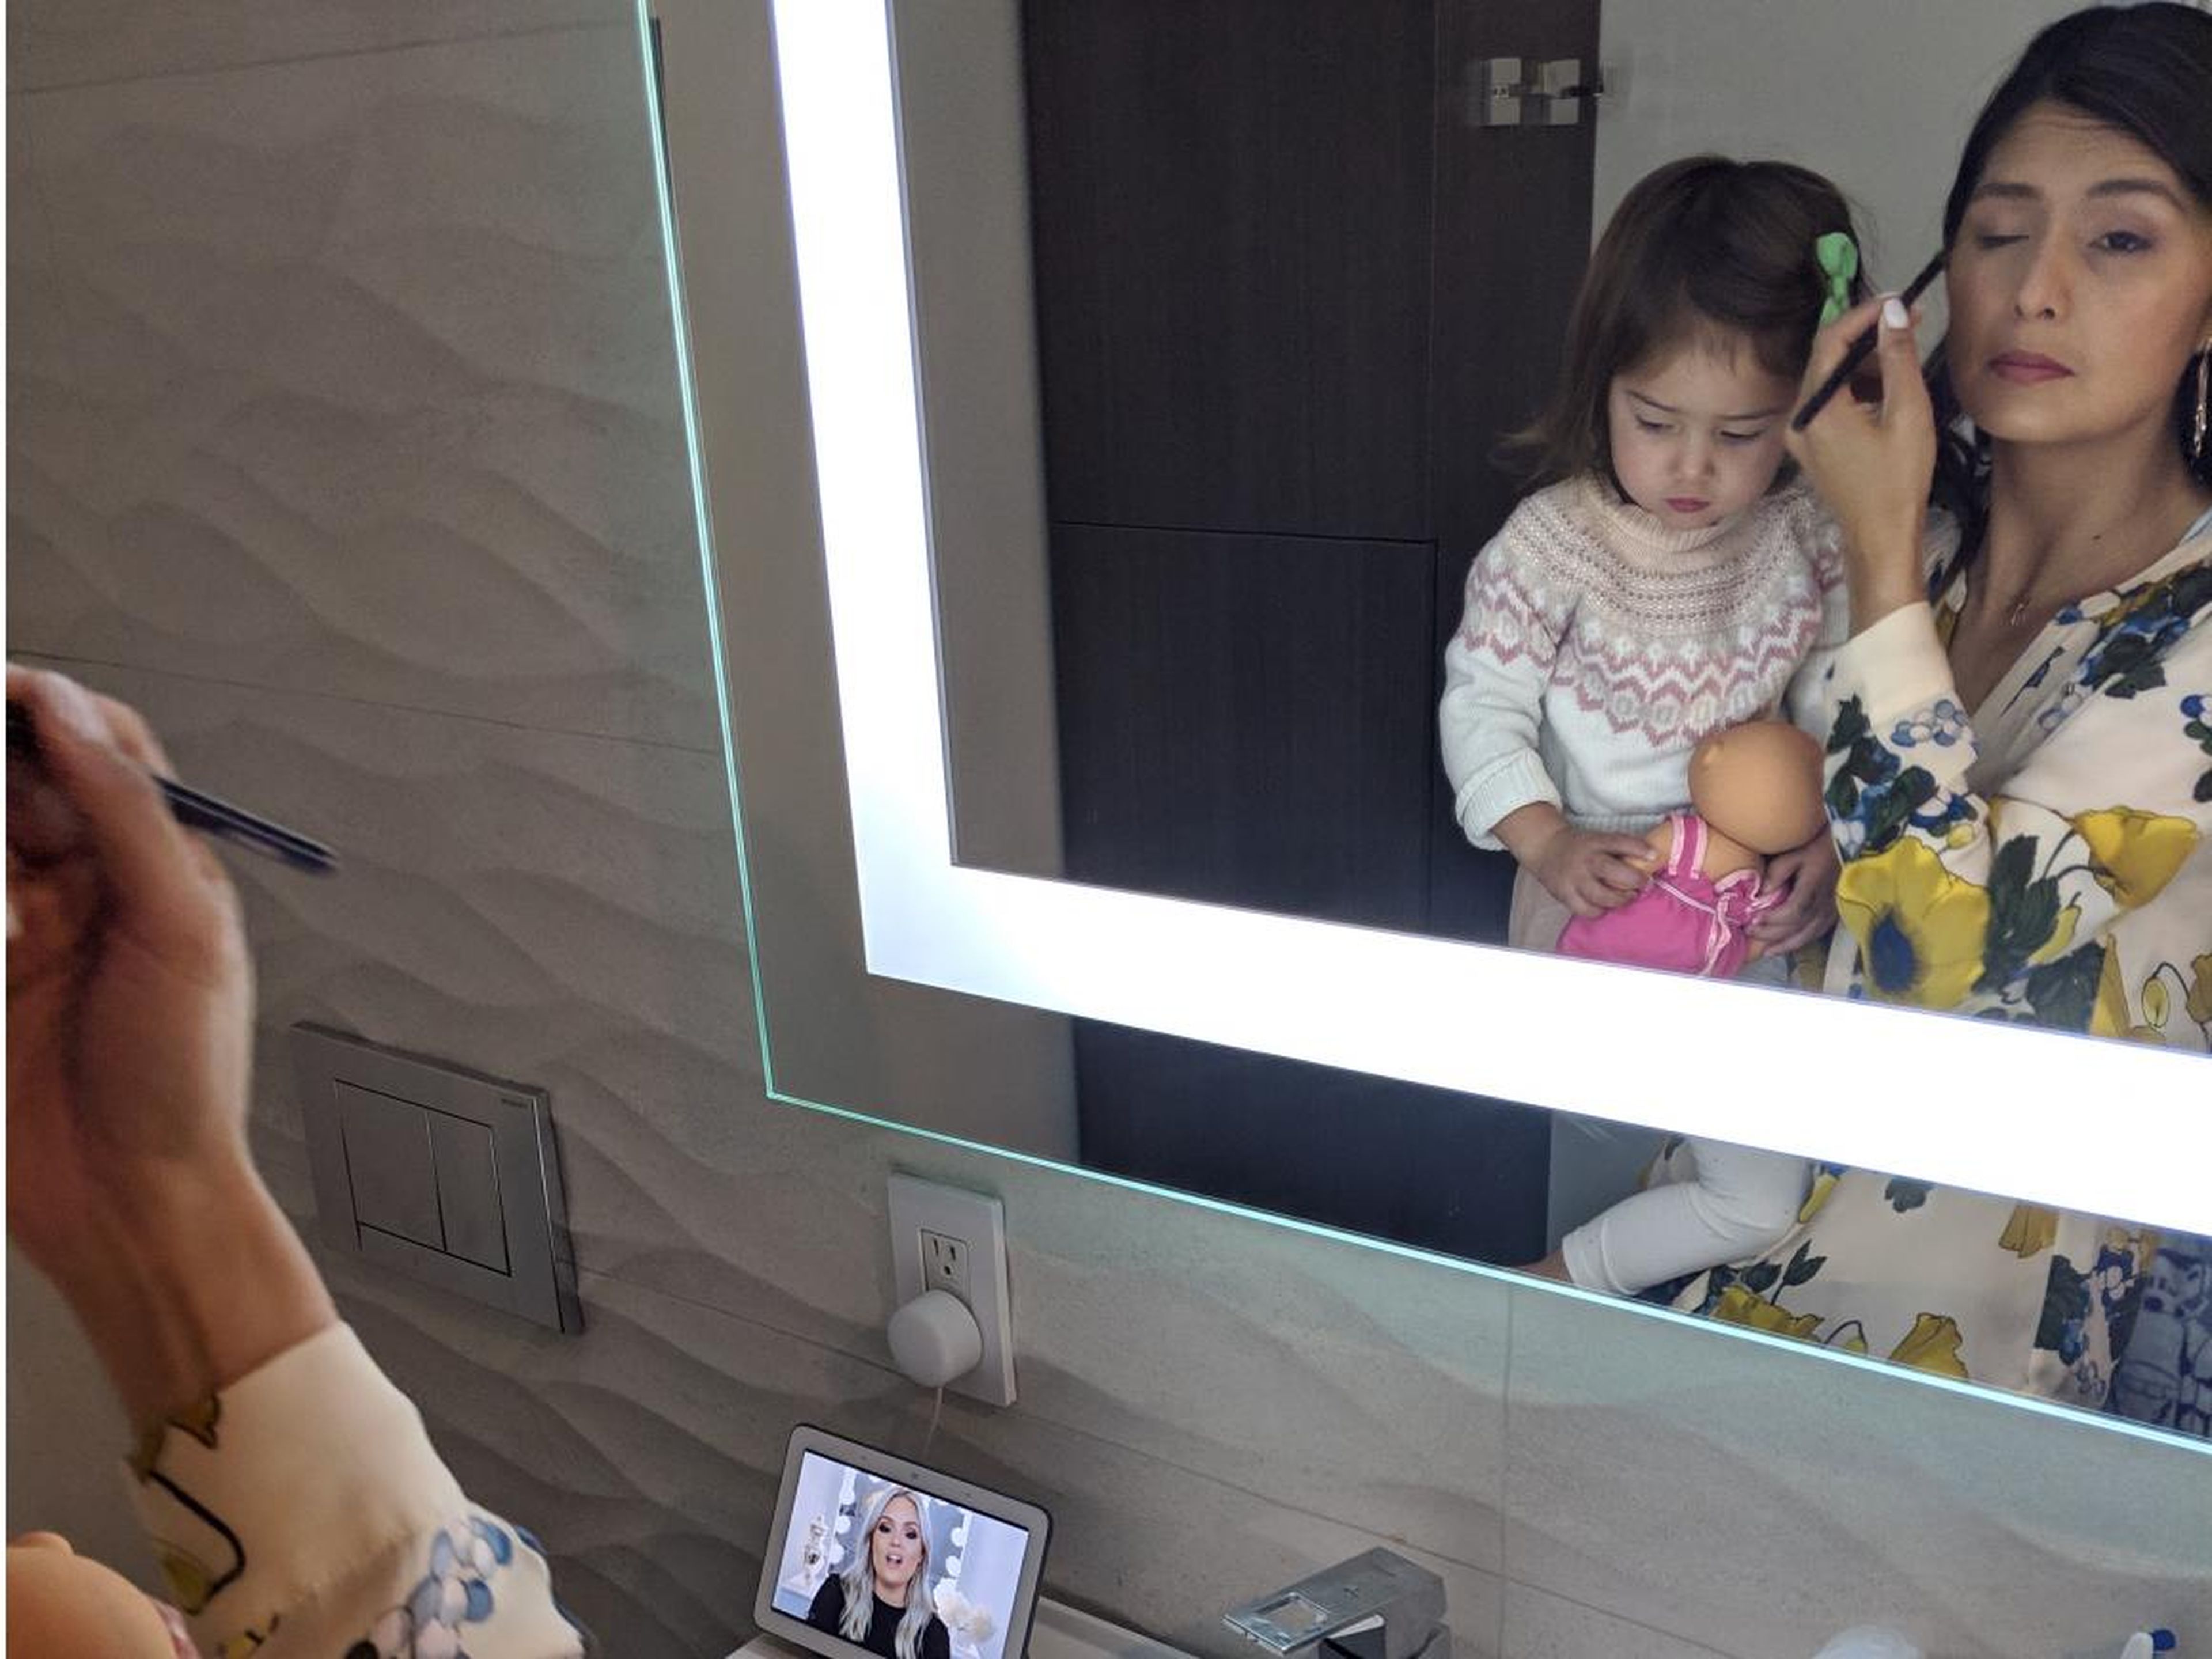 Rincon does her makeup with the help of her Google Home Hub smart display. "I didn't actually know how to put makeup on until, like, the last 10 years — so I kind of use it to look at YouTube videos and figure out how to do my